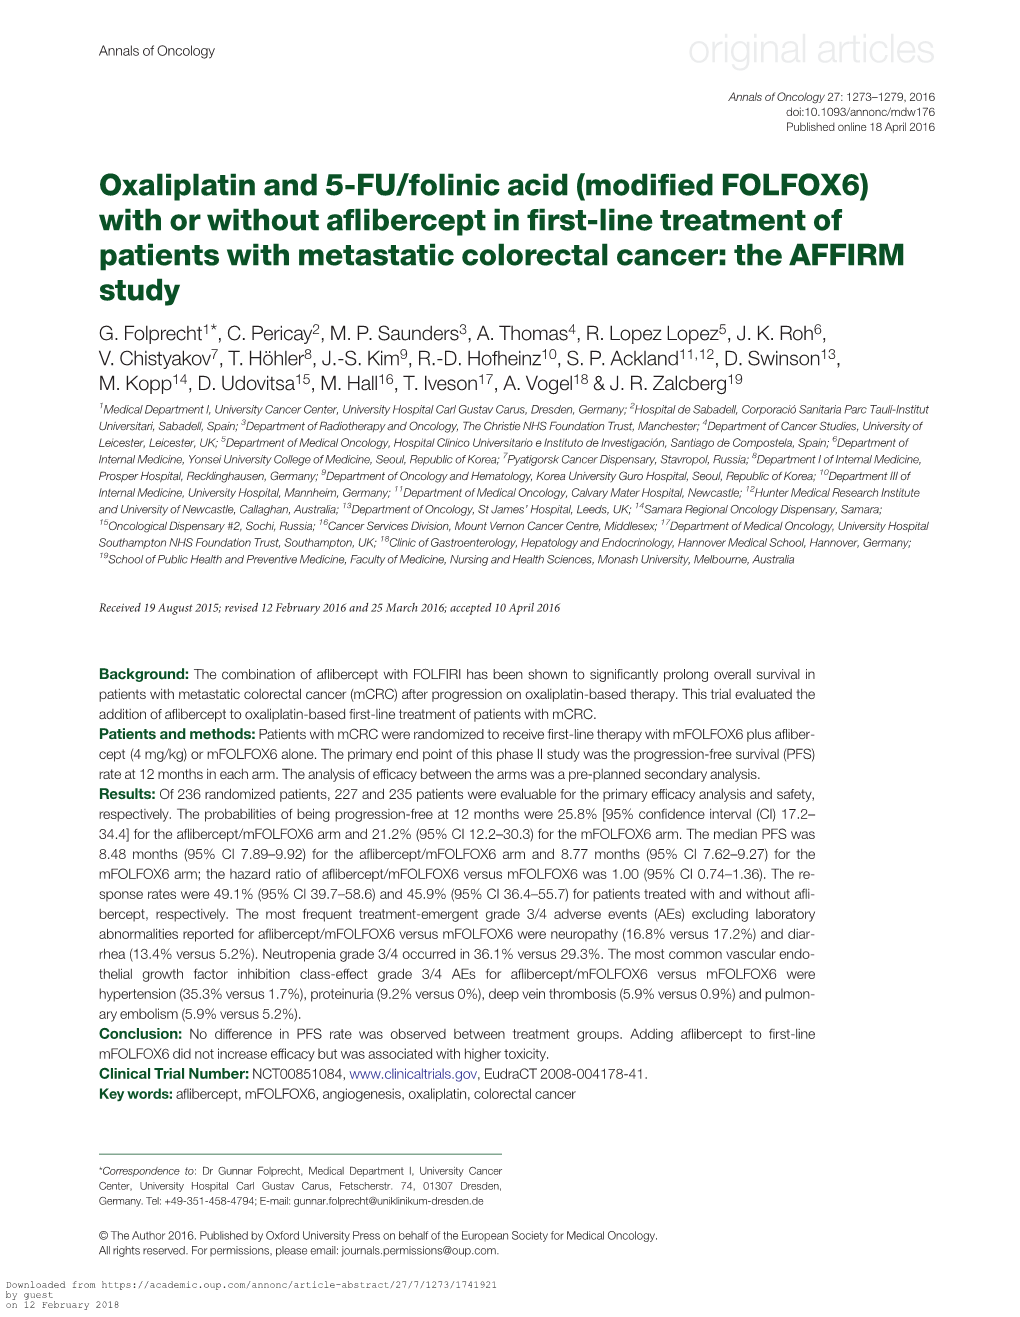 Oxaliplatin and 5-FU/Folinic Acid (Modified FOLFOX6) with Or Without Aflibercept in First-Line Treatment of Patients with Metast